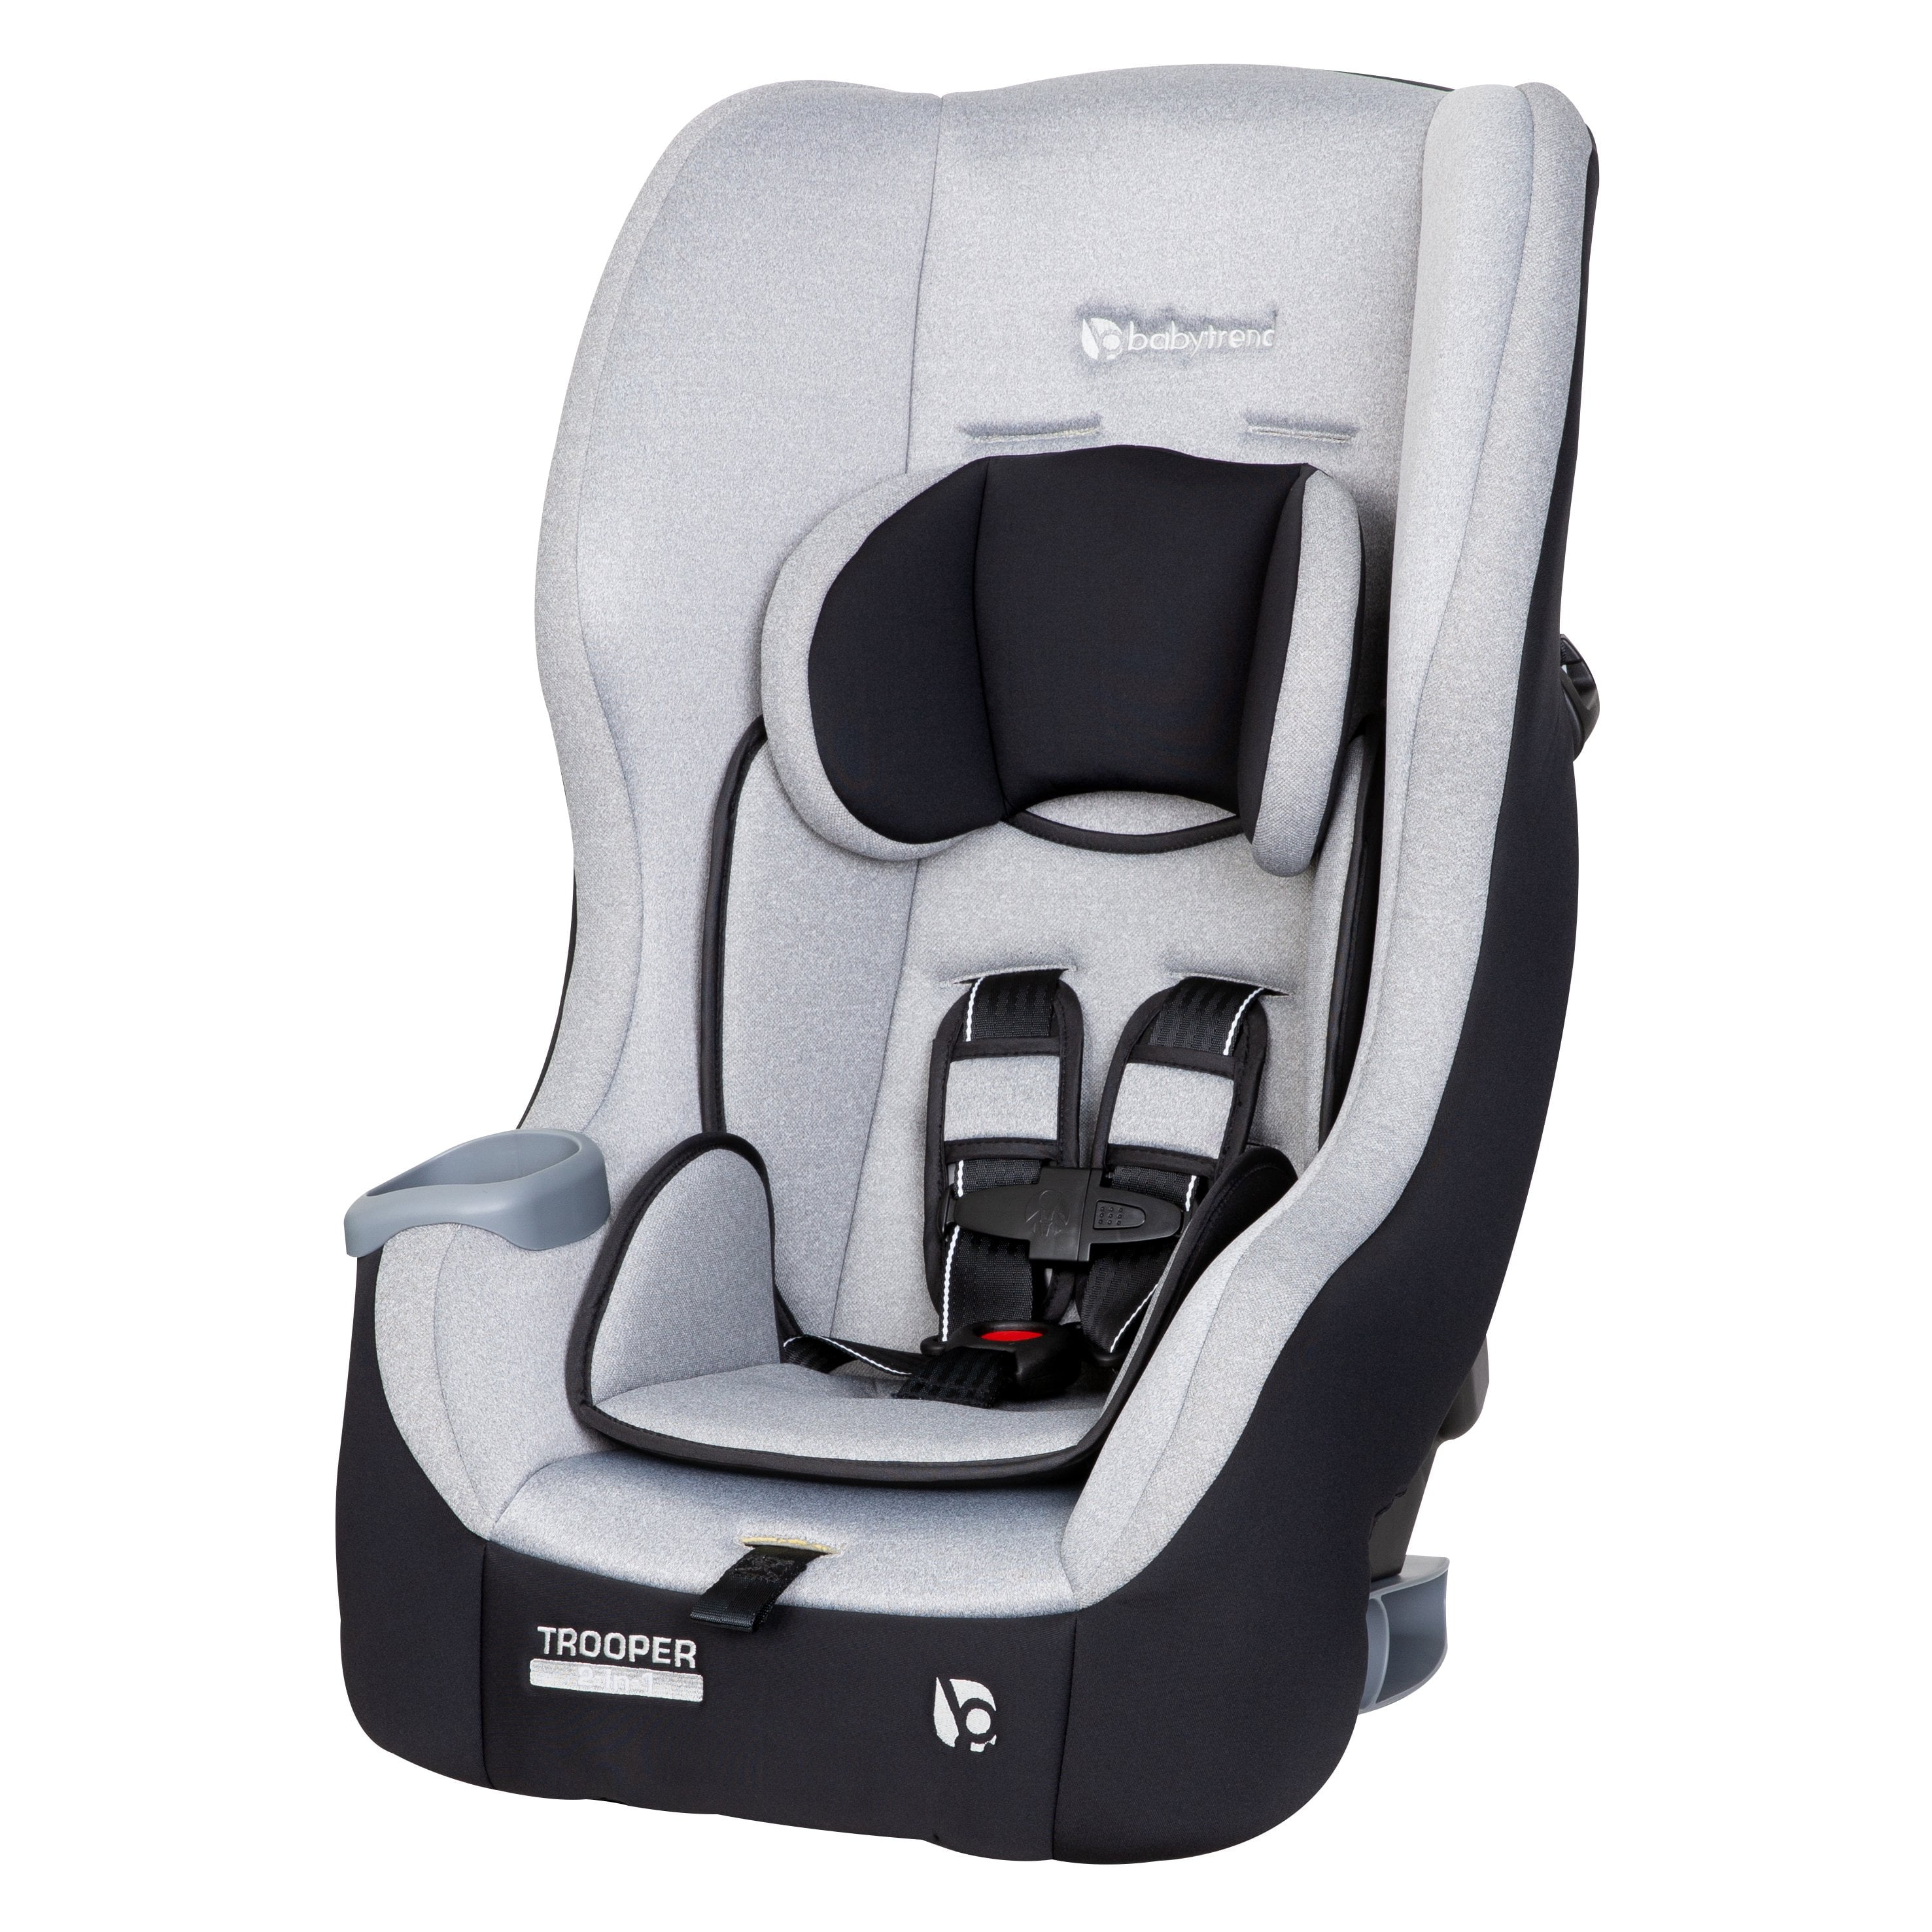 Photo 1 of ***NEW***
Baby Trend Trooper 3-in-1 Convertible Car Seat - Moondust - Light Gray